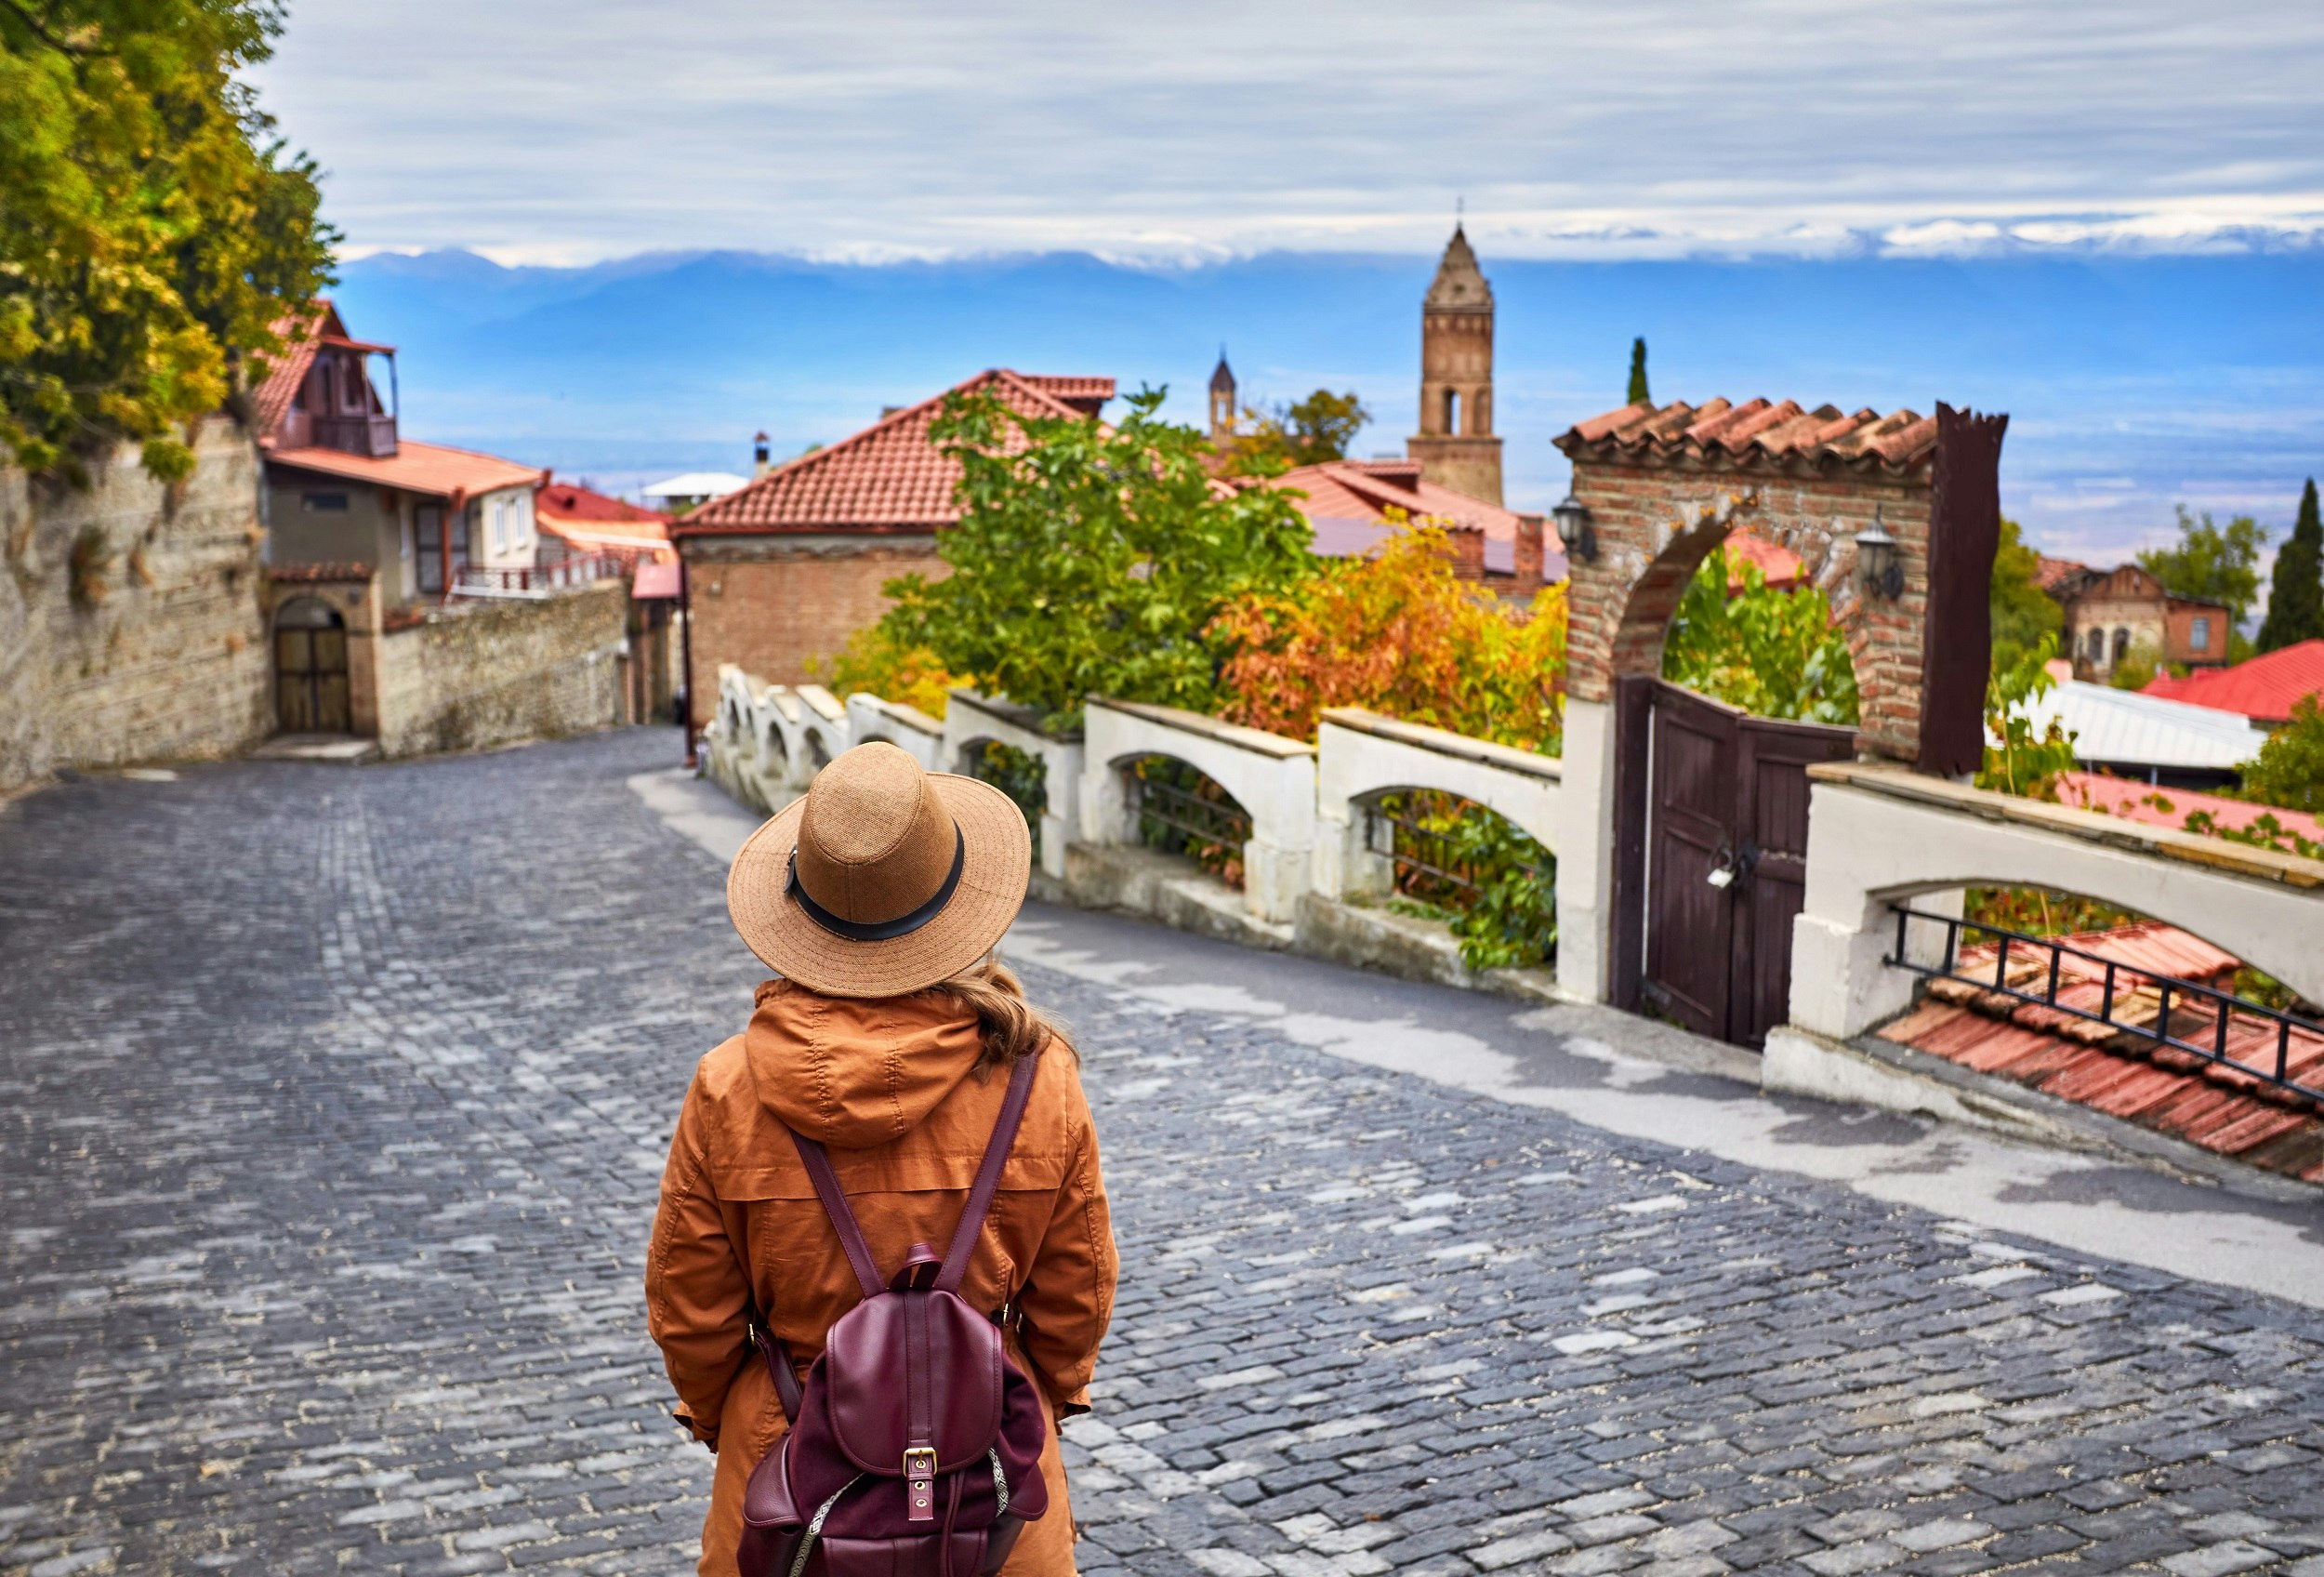 A woman walks down a wide cobbled street towards a town with a square church tower. Mountains are in the distance.